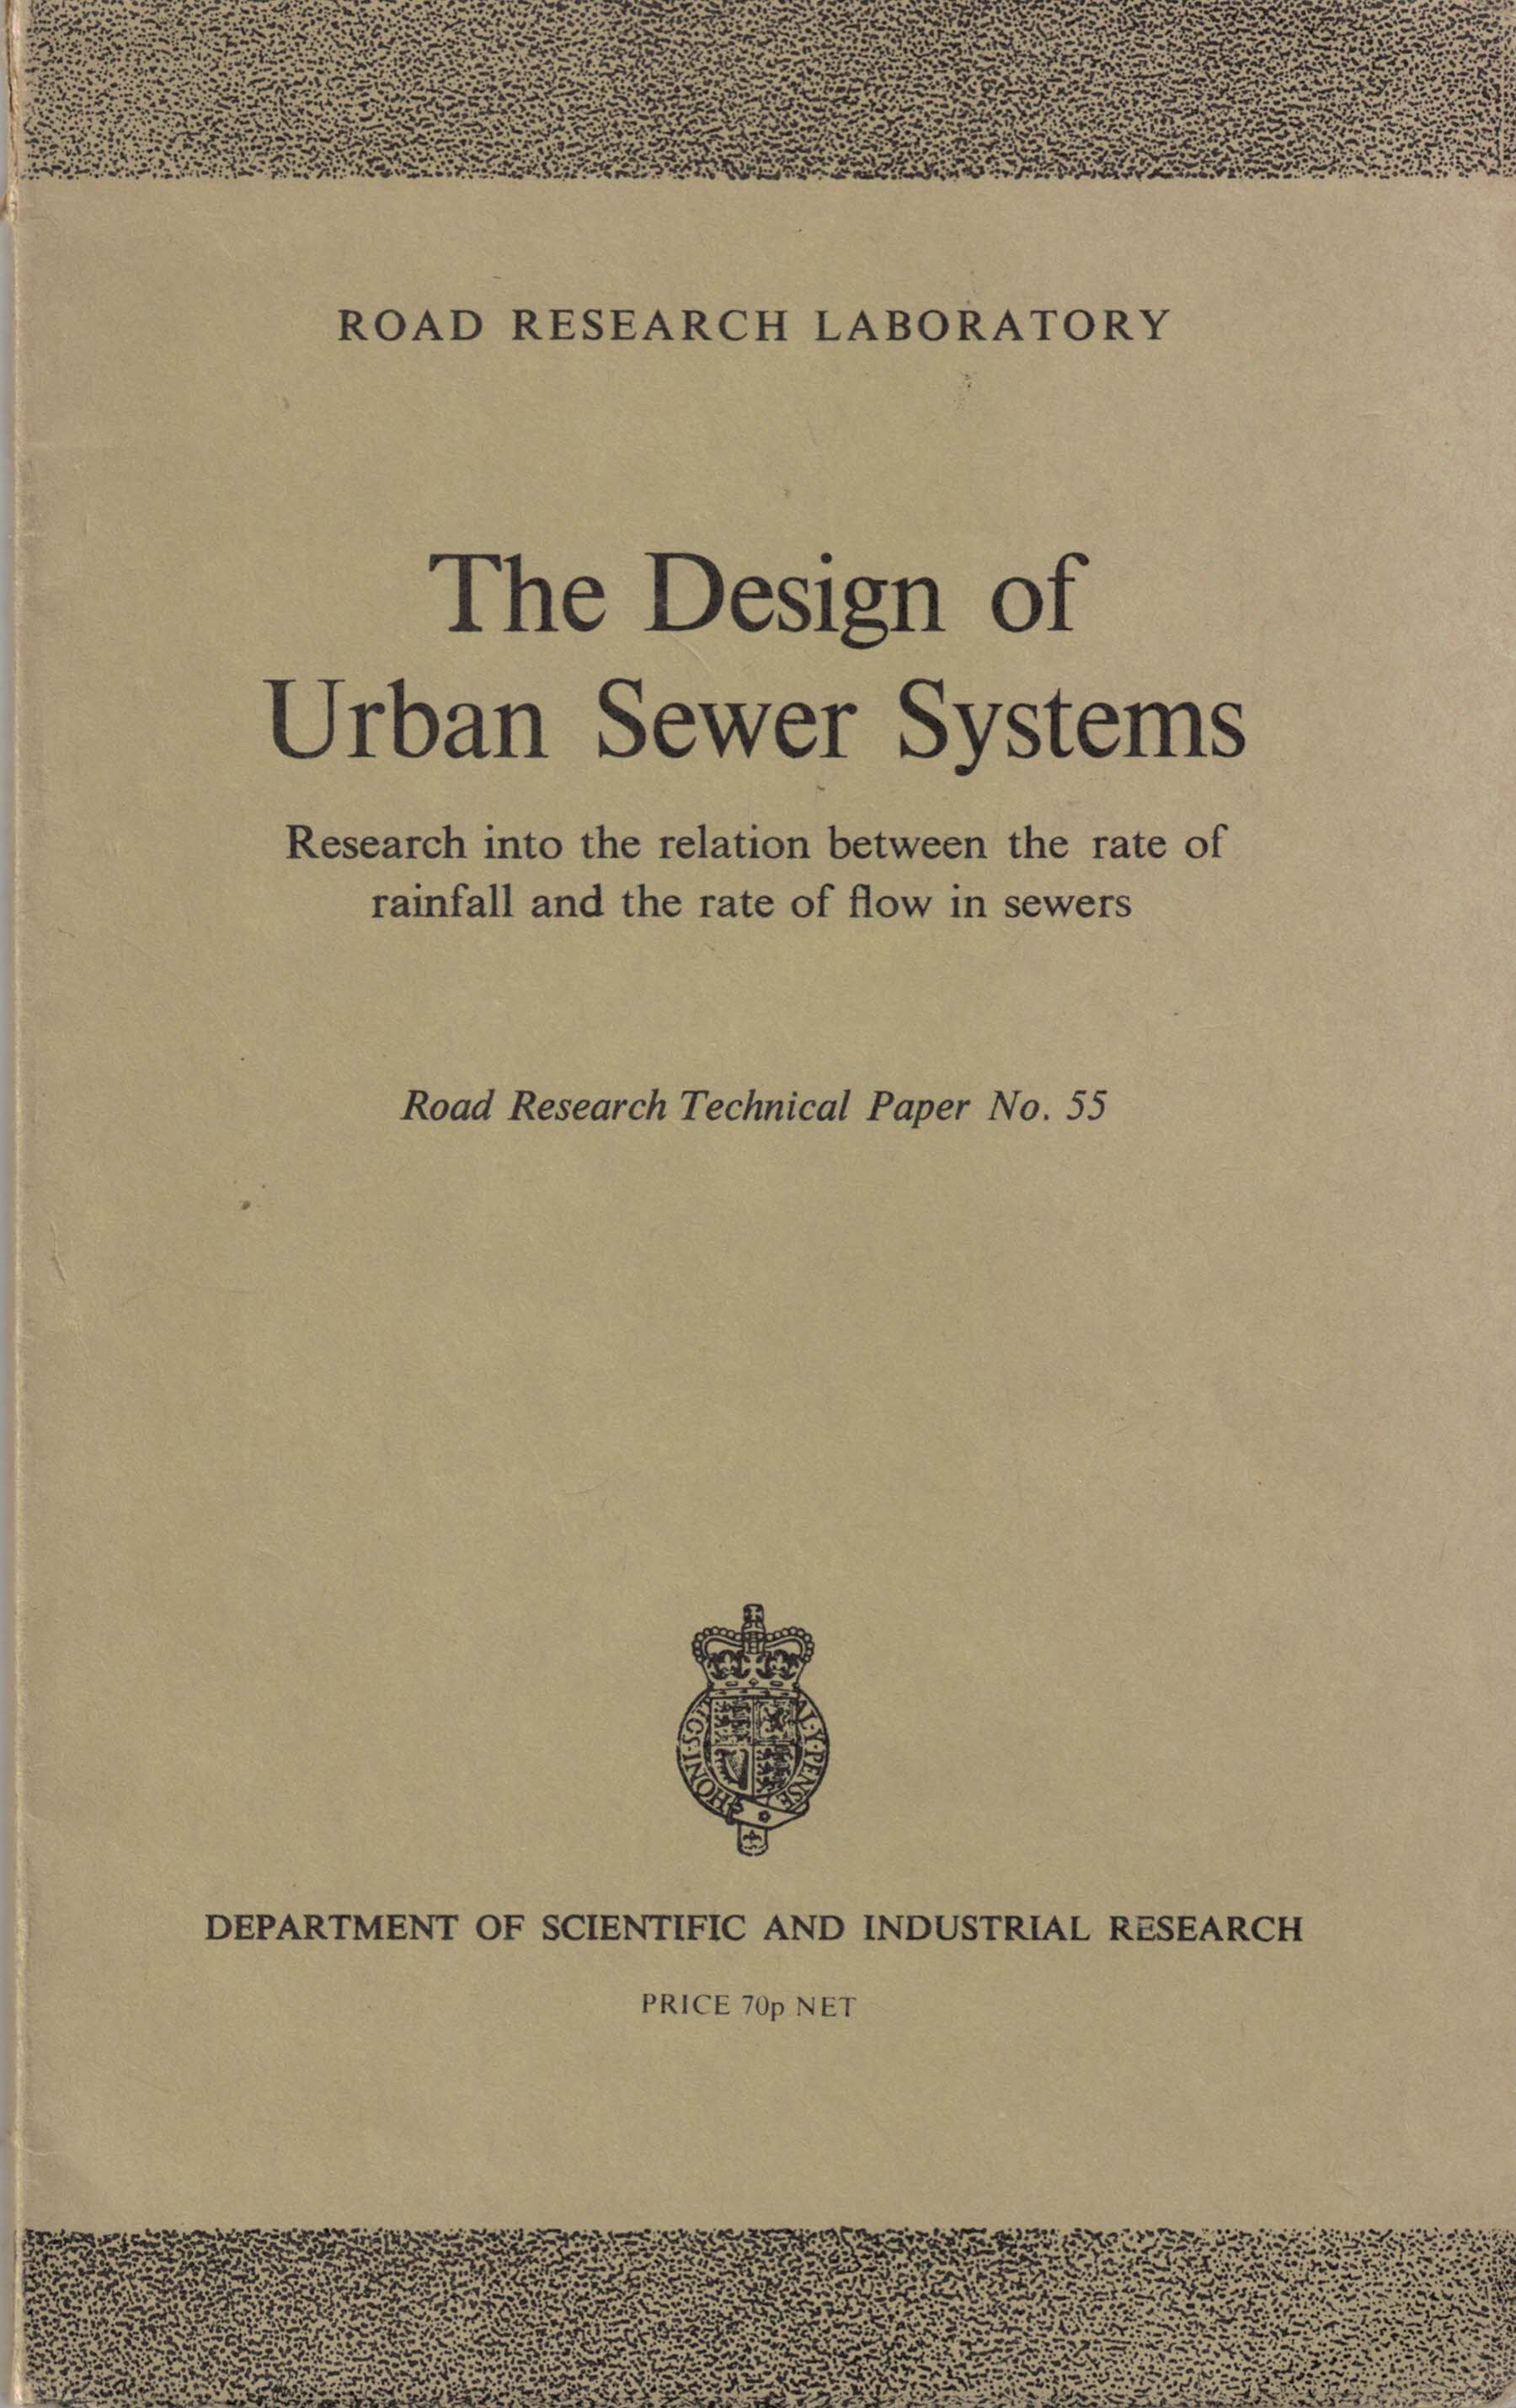 The Design of the Urban Sewer System. Research into the Relation Between Rate of Rainfall and the Rate of Flow in Sewers.